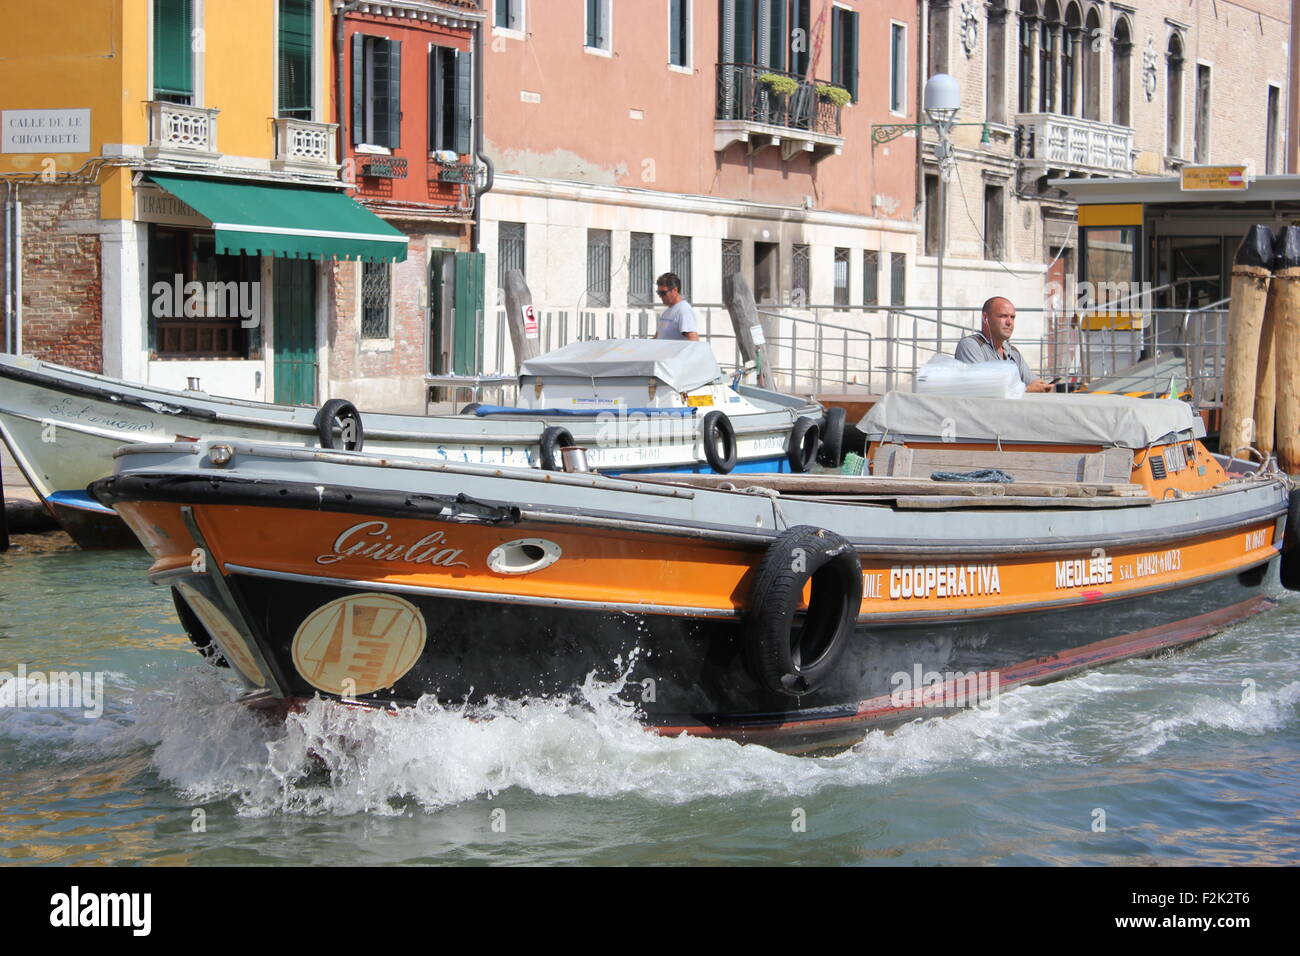 A boat speeds along a canal in Venice Italy Stock Photo